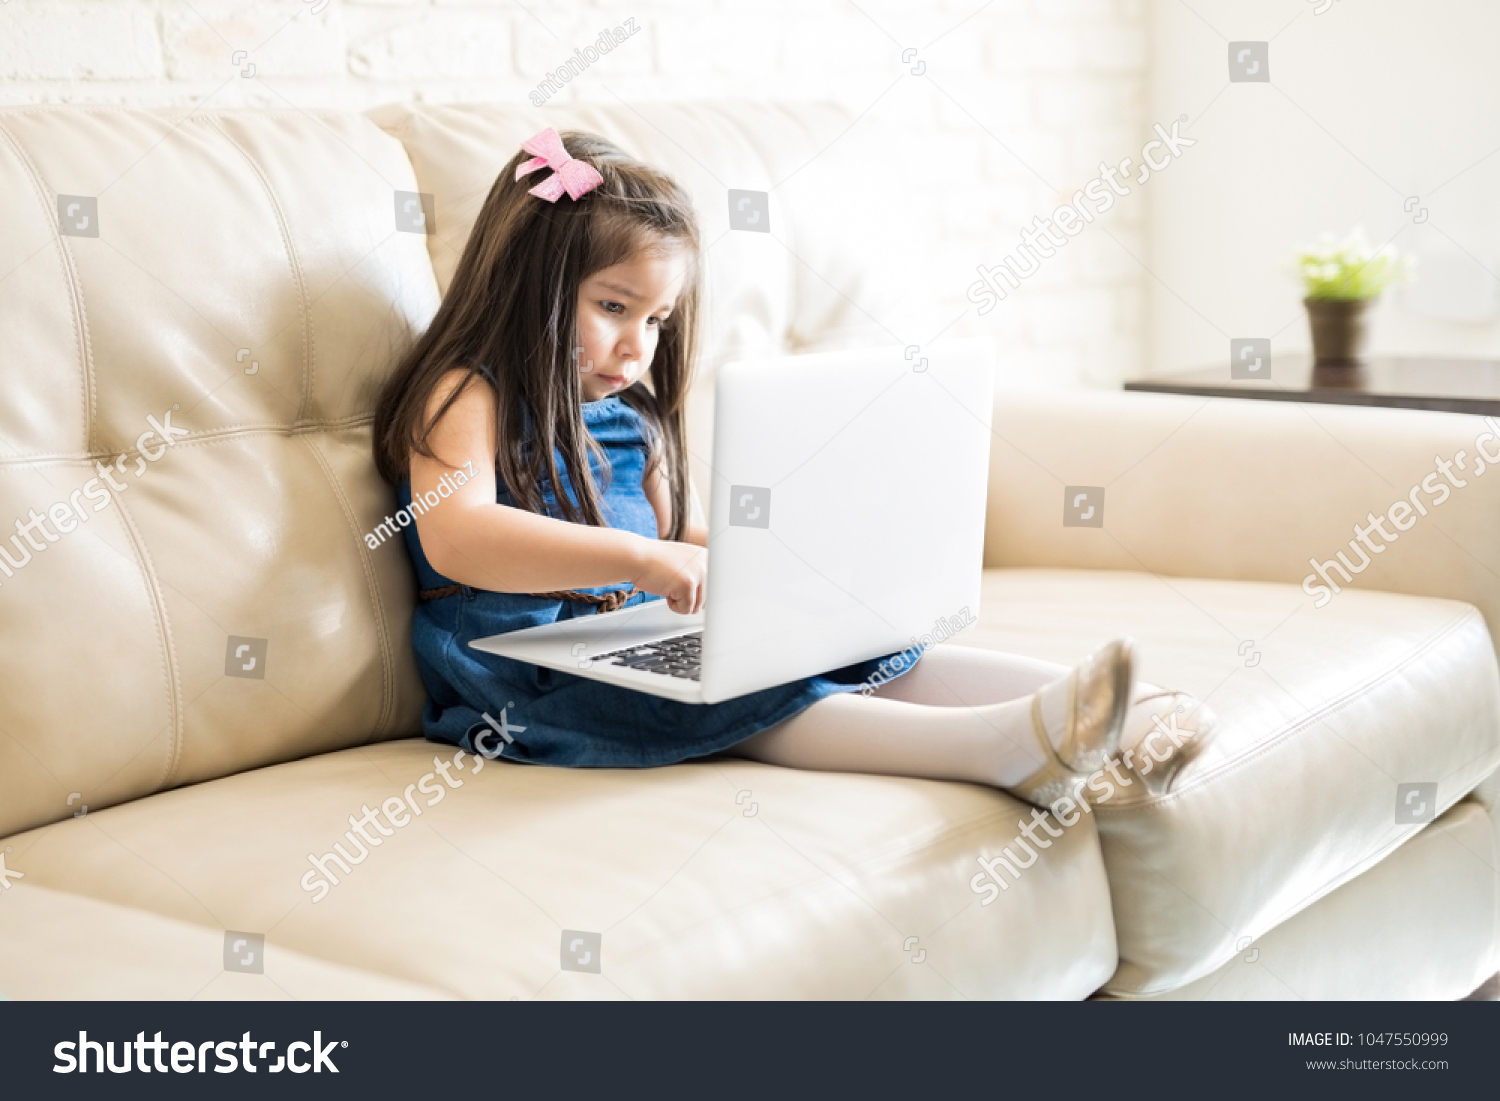 Little hispanic girl playing games on laptop computer while sitting on sofa at home #1047550999